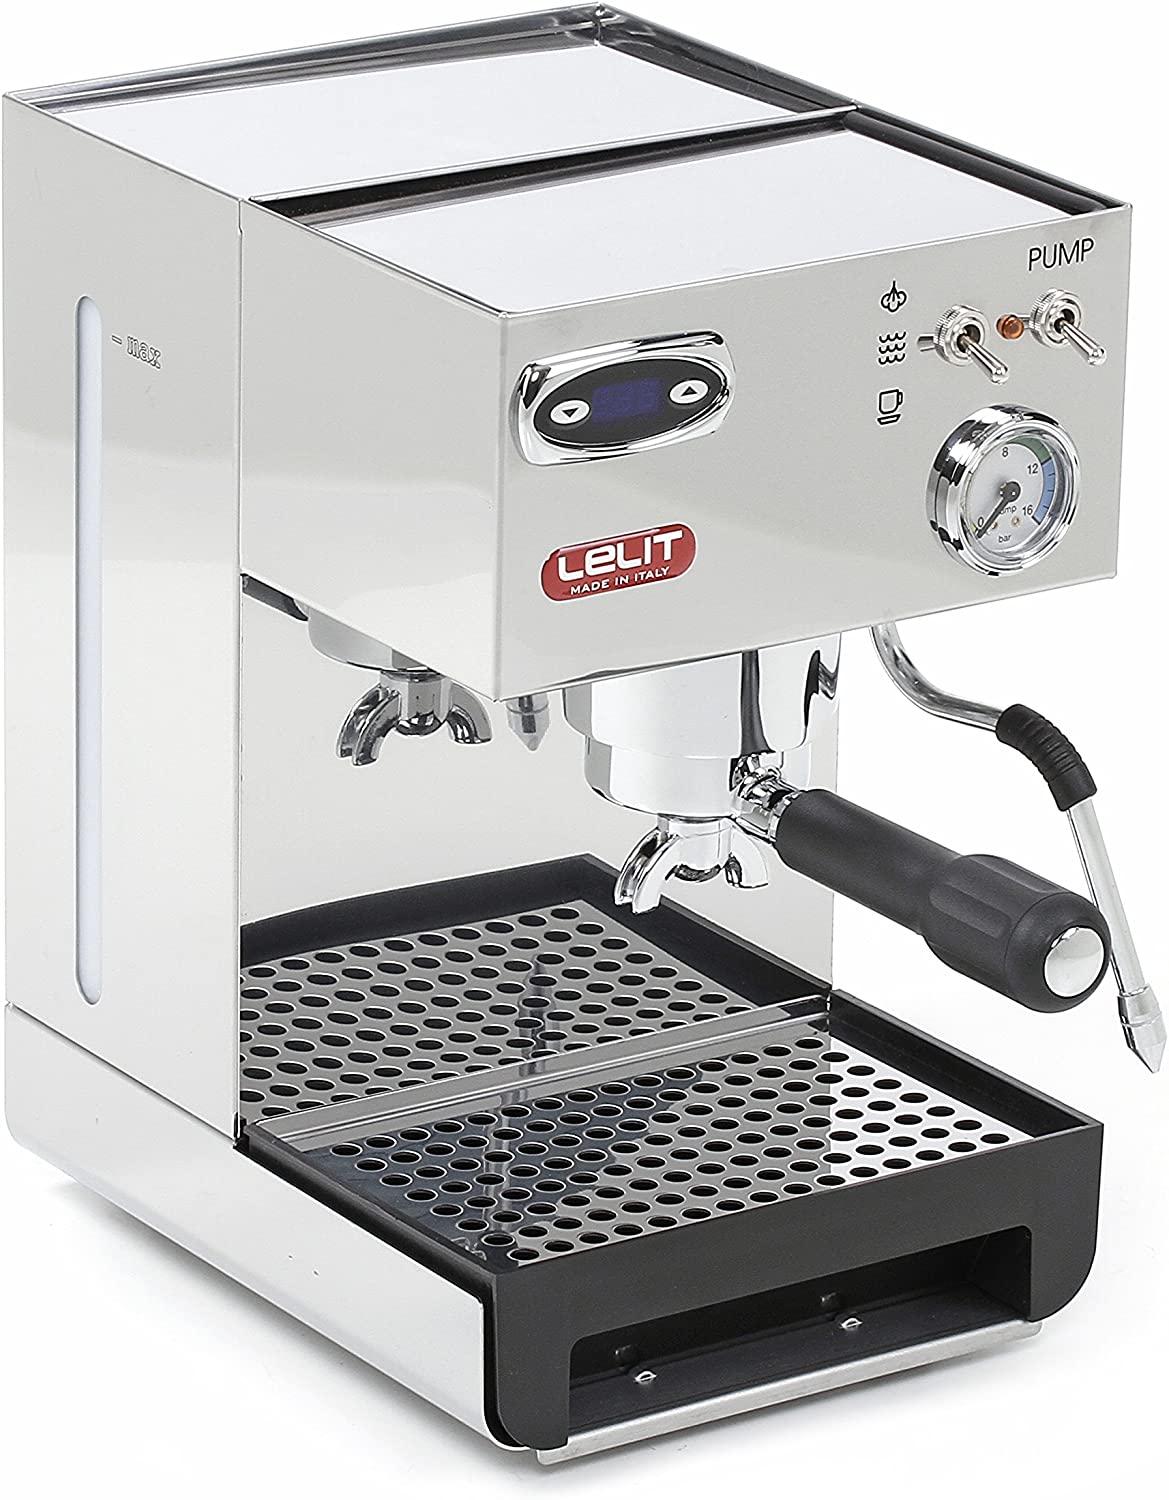 Lelit Anna Pl41tem Semi Professional Coffee Machine for Espresso, Cappuccino Pads, Coffee Temperature Control via PID Control, Stainless Steel Body, 2 Litres, Silver